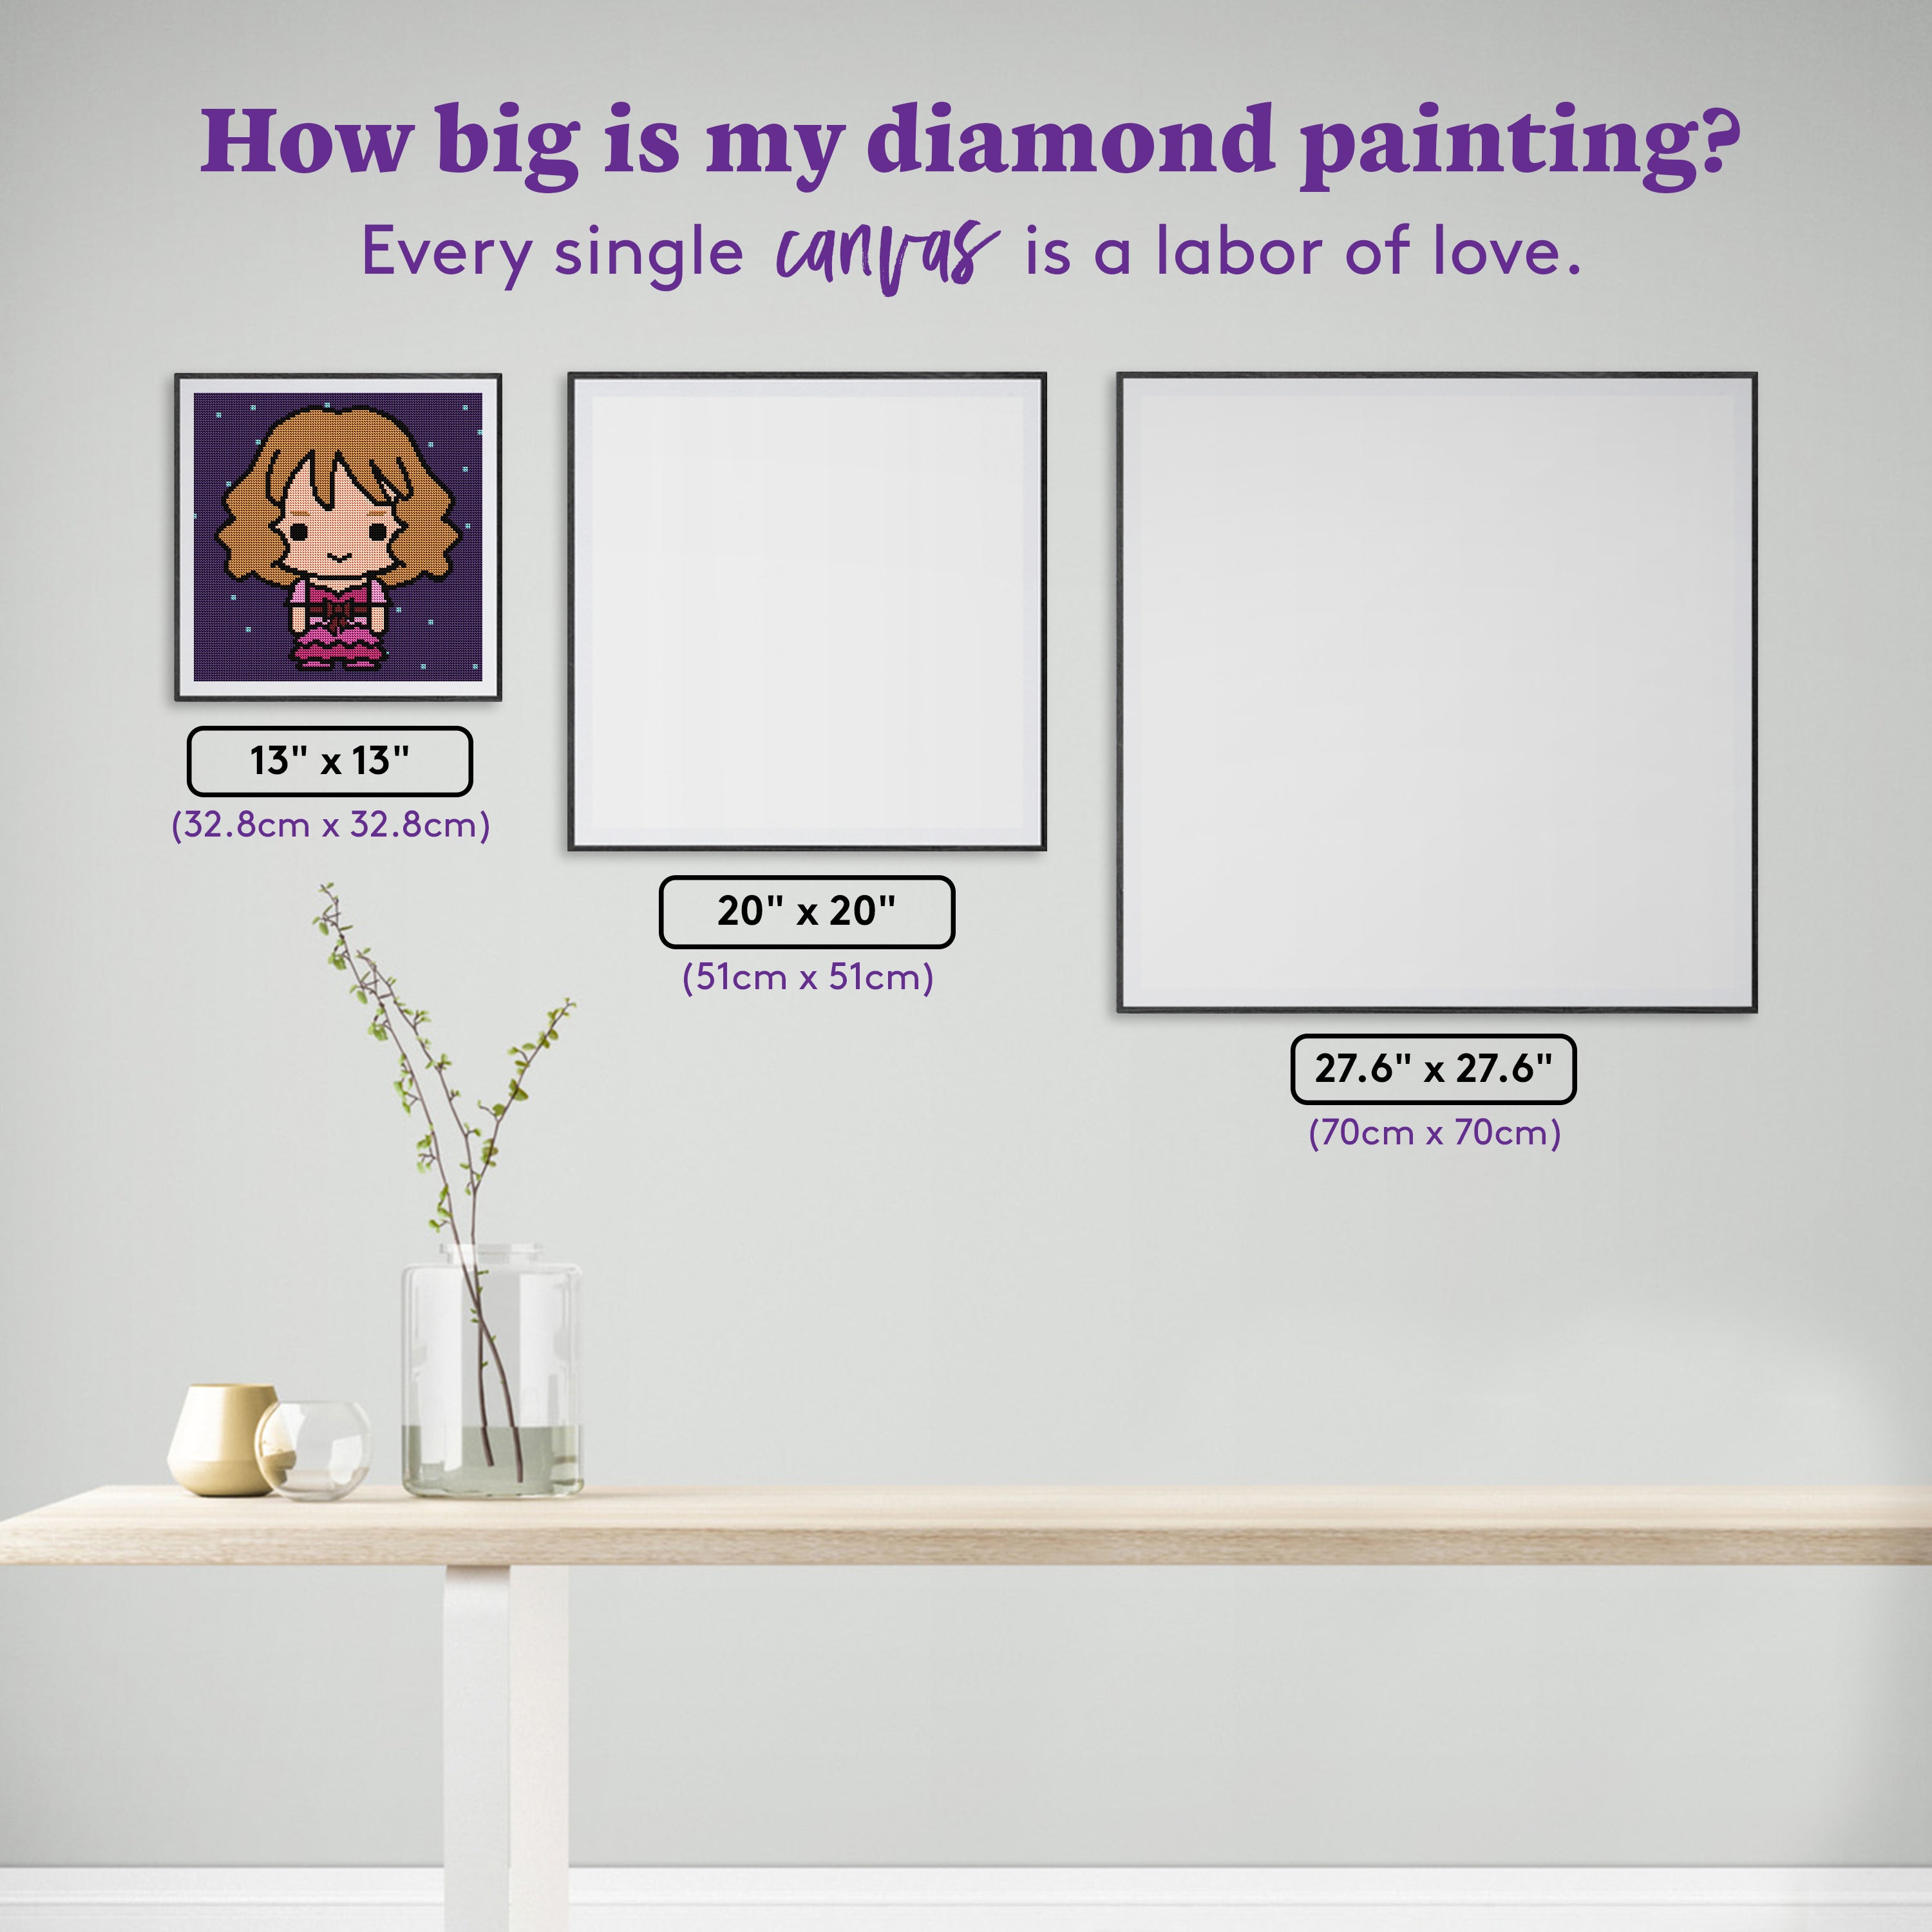 Where can I find some really small diamond paintings? : r